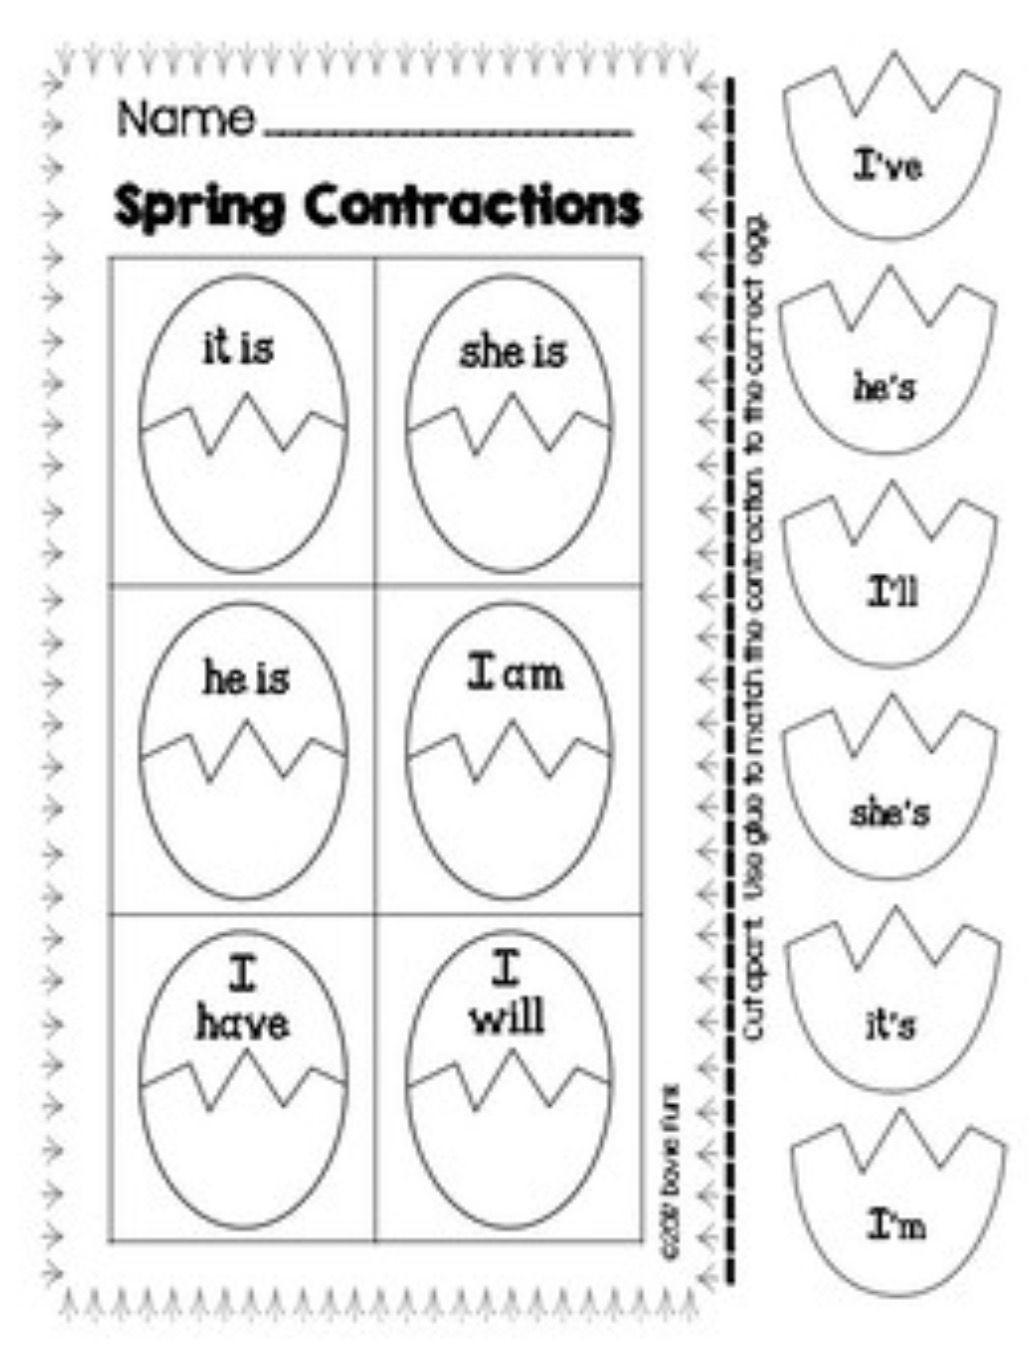 Contractions Worksheet 2nd Grade Spring Contractions Literacy Center and Two Printables